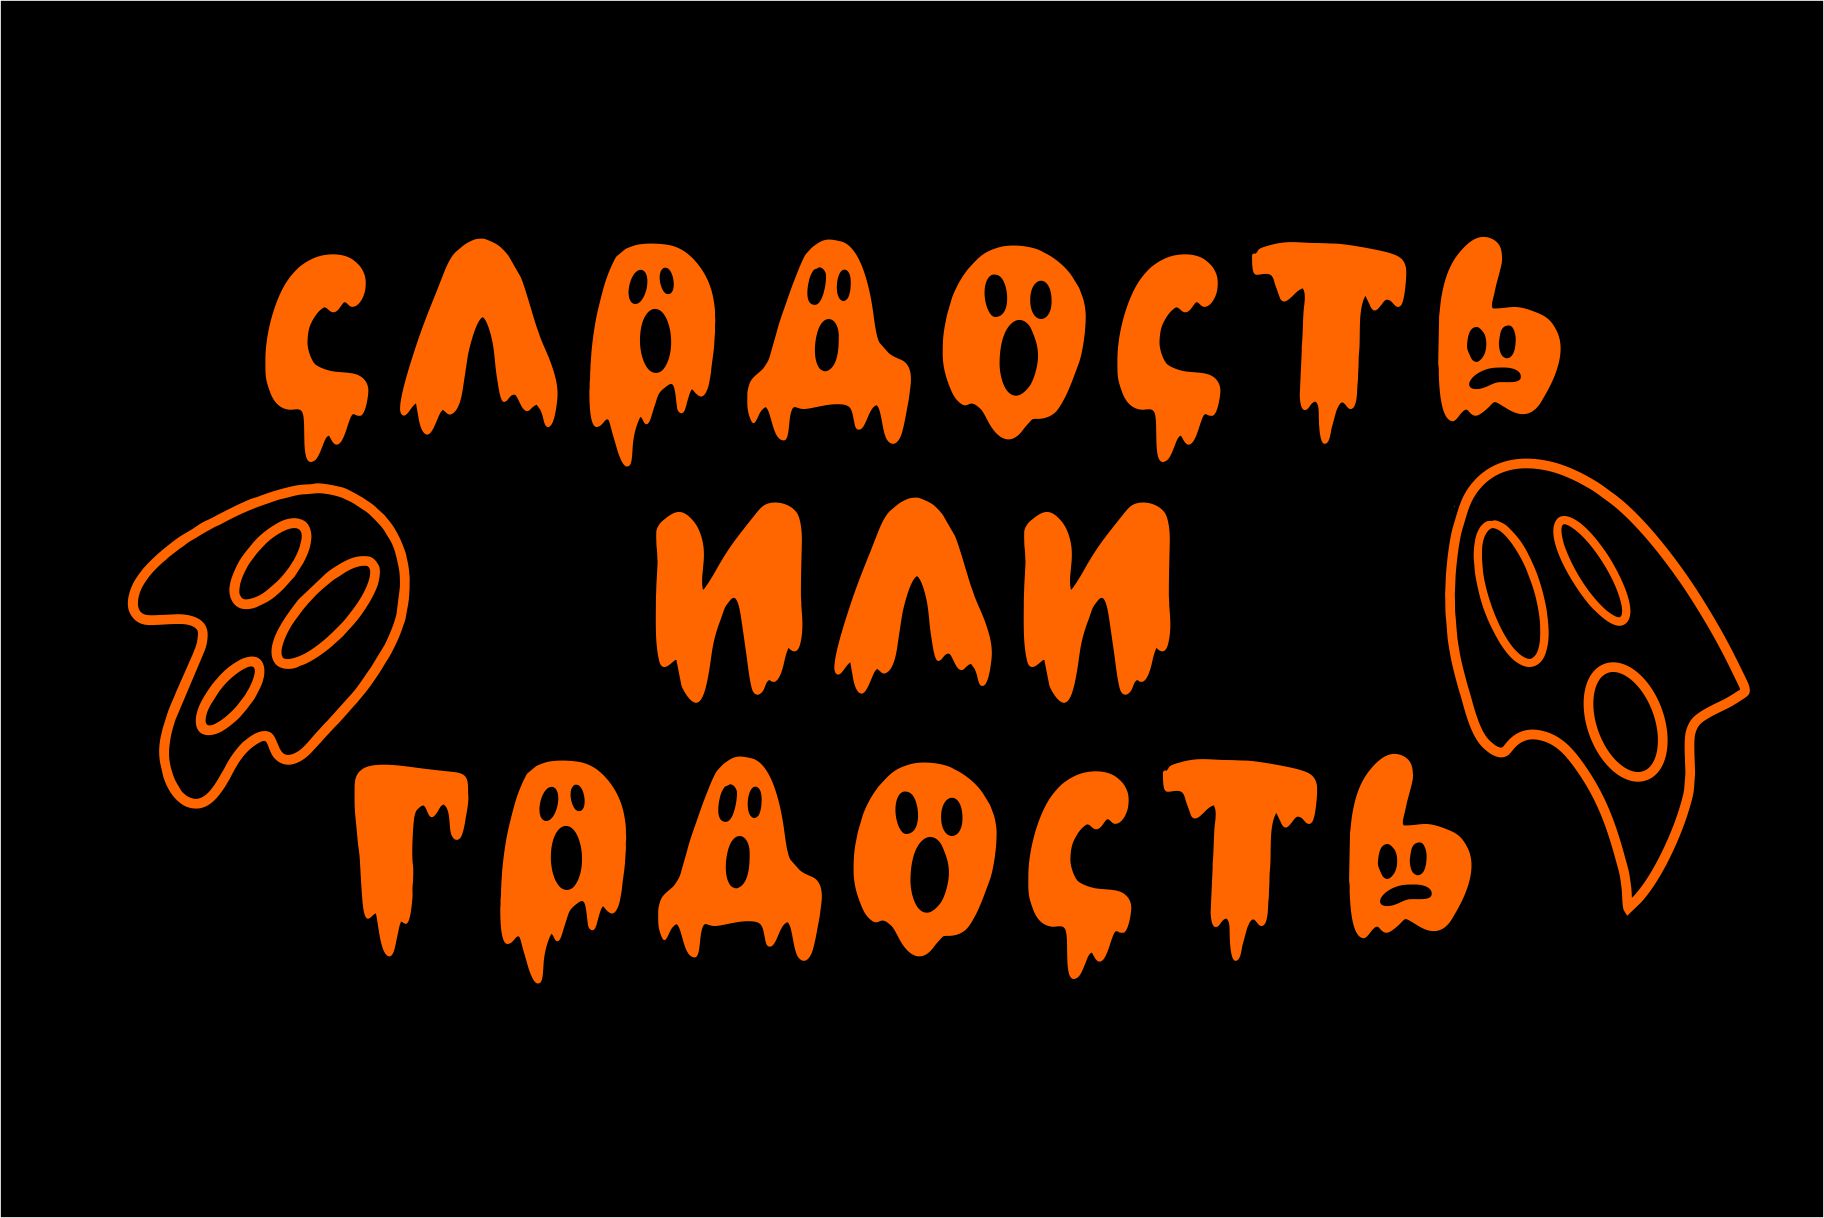 Ghost font is perfect for halloween themed projects.